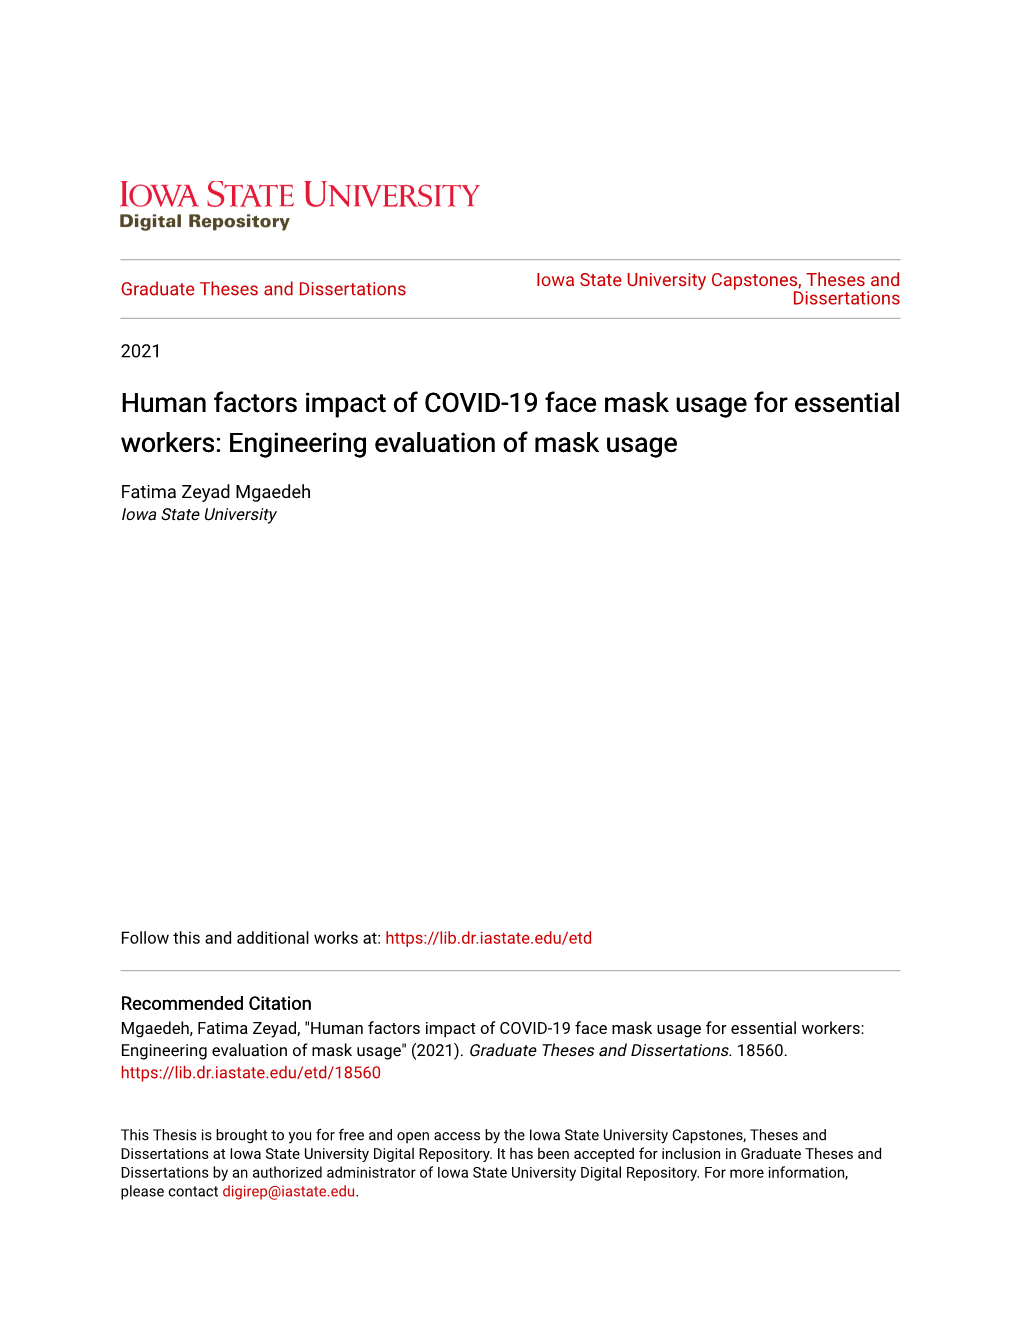 Human Factors Impact of COVID-19 Face Mask Usage for Essential Workers: Engineering Evaluation of Mask Usage